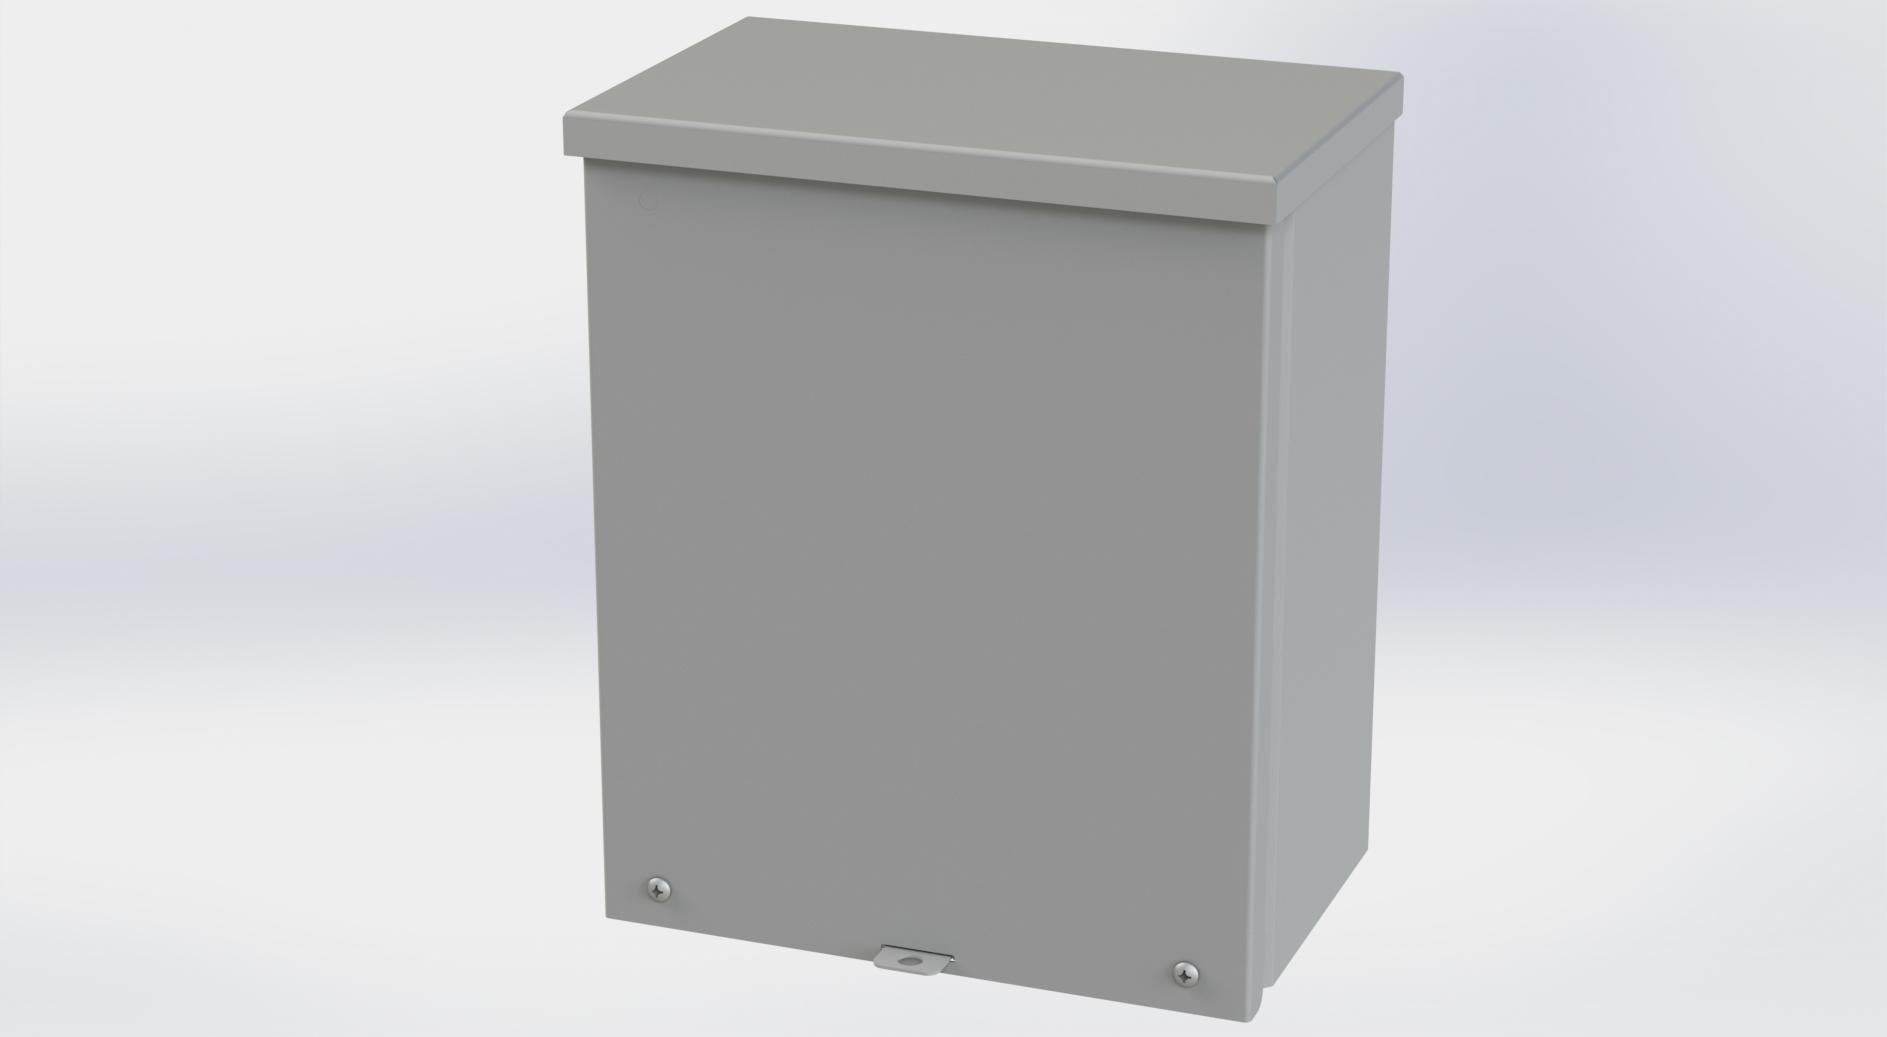 Saginaw Control SCE-12R106 Type-3R Screw Cover Enclosure, Height:12.00", Width:10.00", Depth:6.00", ANSI-61 gray powder coating inside and out.